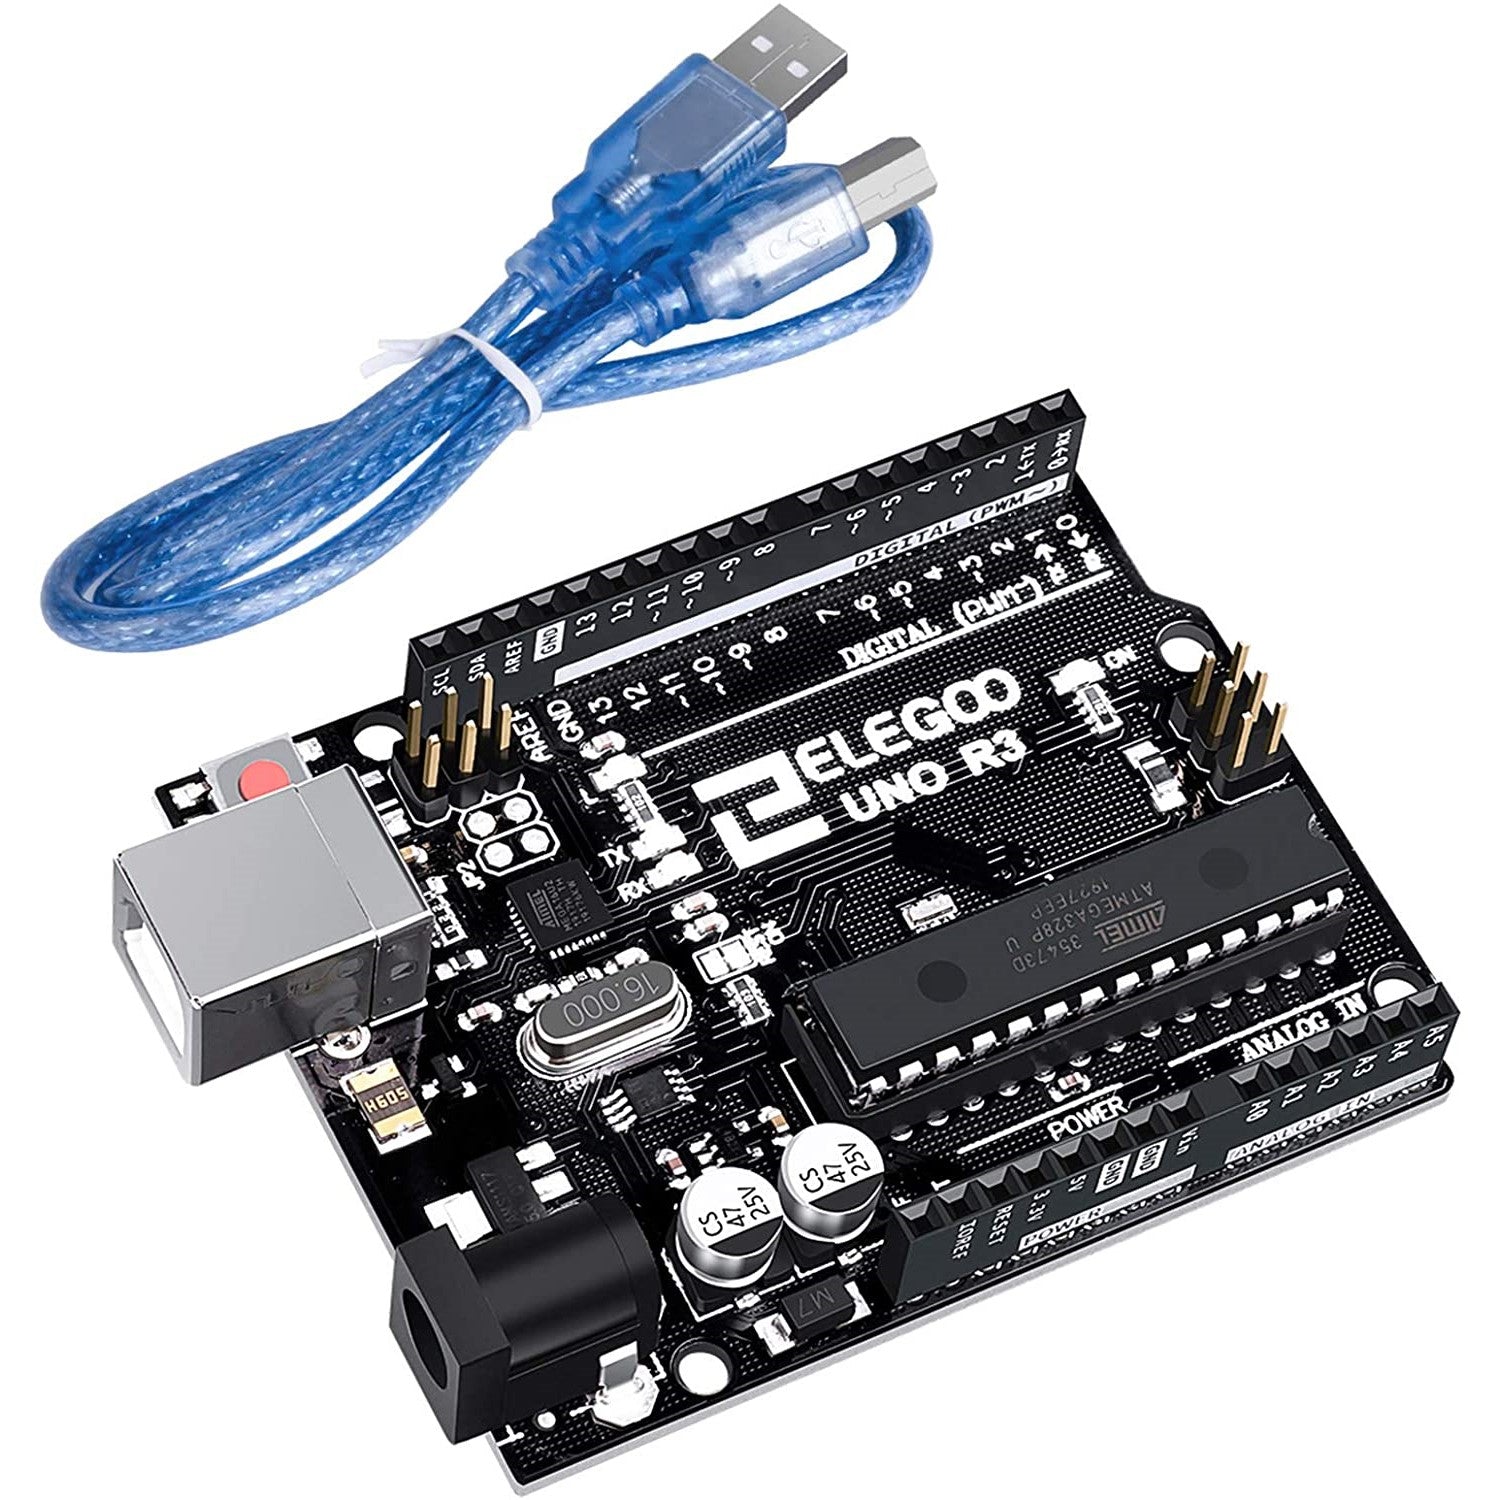 ELEGOO UNO R3 Board with USB Cable for Arduino IDE Projects RoHS Compliant